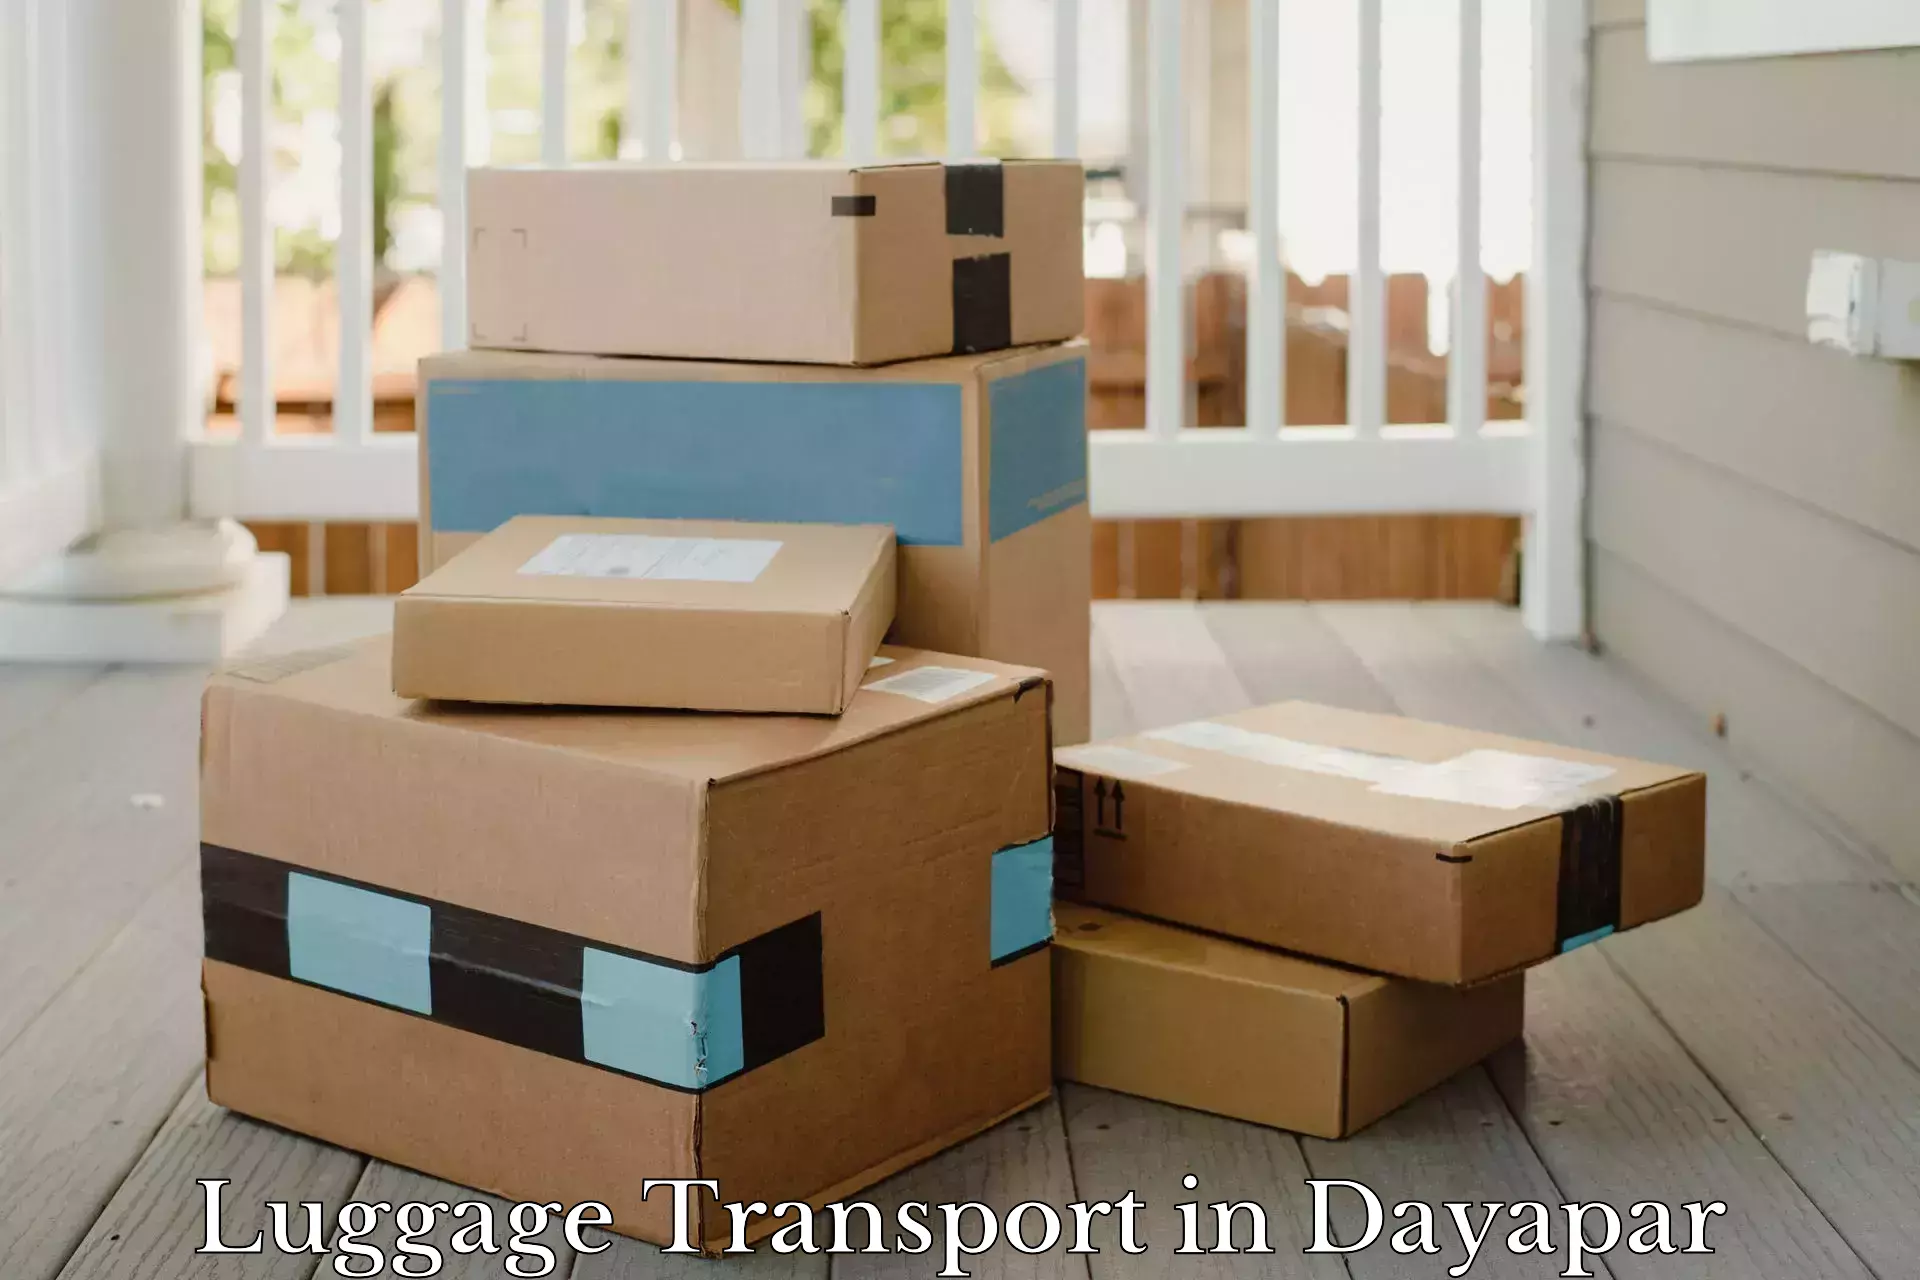 Express luggage delivery in Dayapar